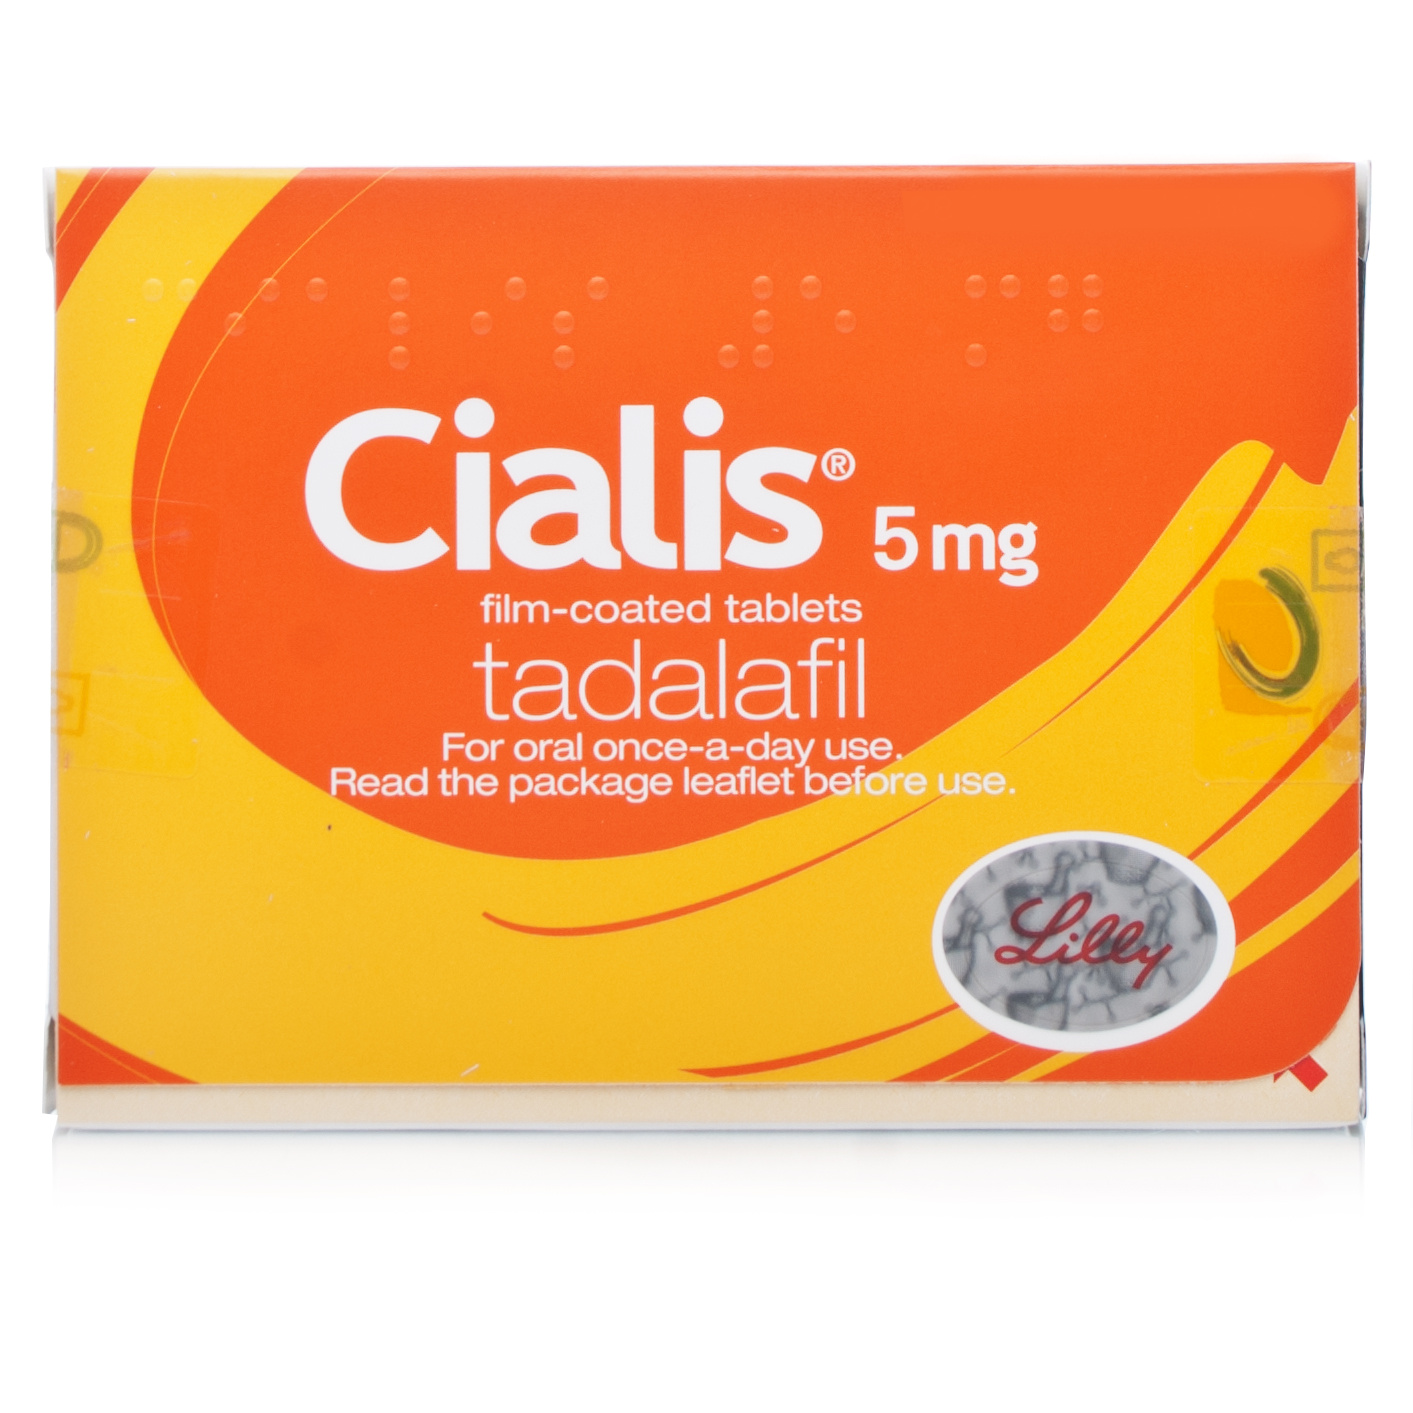 where can i get cialis from in uk or in the uk how much is 9